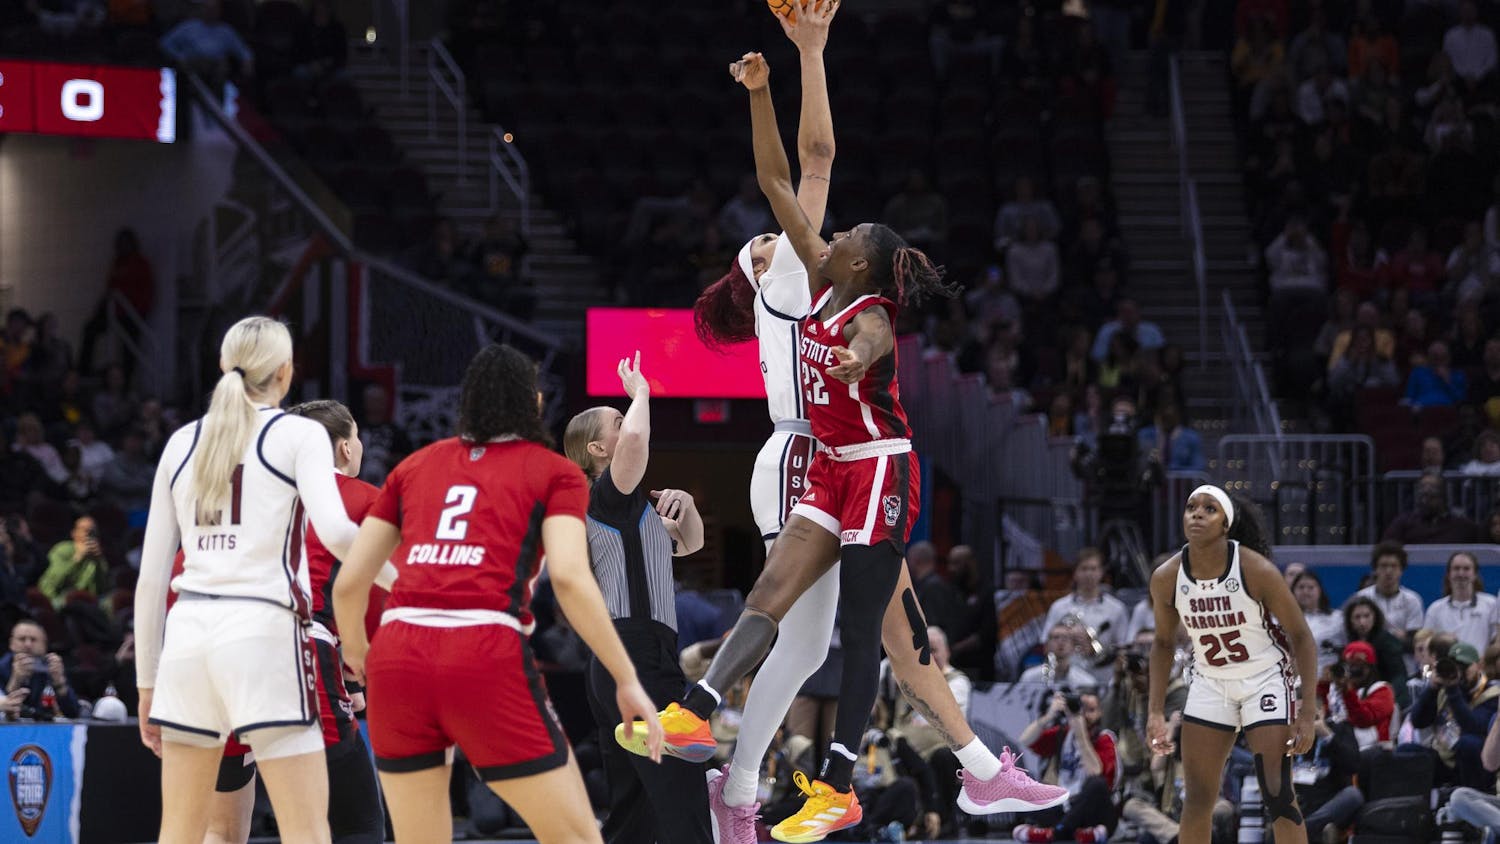 The South Carolina Gamecocks delivered a decisive victory to the North Carolina State Wolfpack in the first of two semifinal games at the 2024 Women’s Final Four matchup on April 5, 2024. The Gamecocks defeated the Wolf Pack 78-59 at Rocket Mortgage FieldHouse in Cleveland, OH.